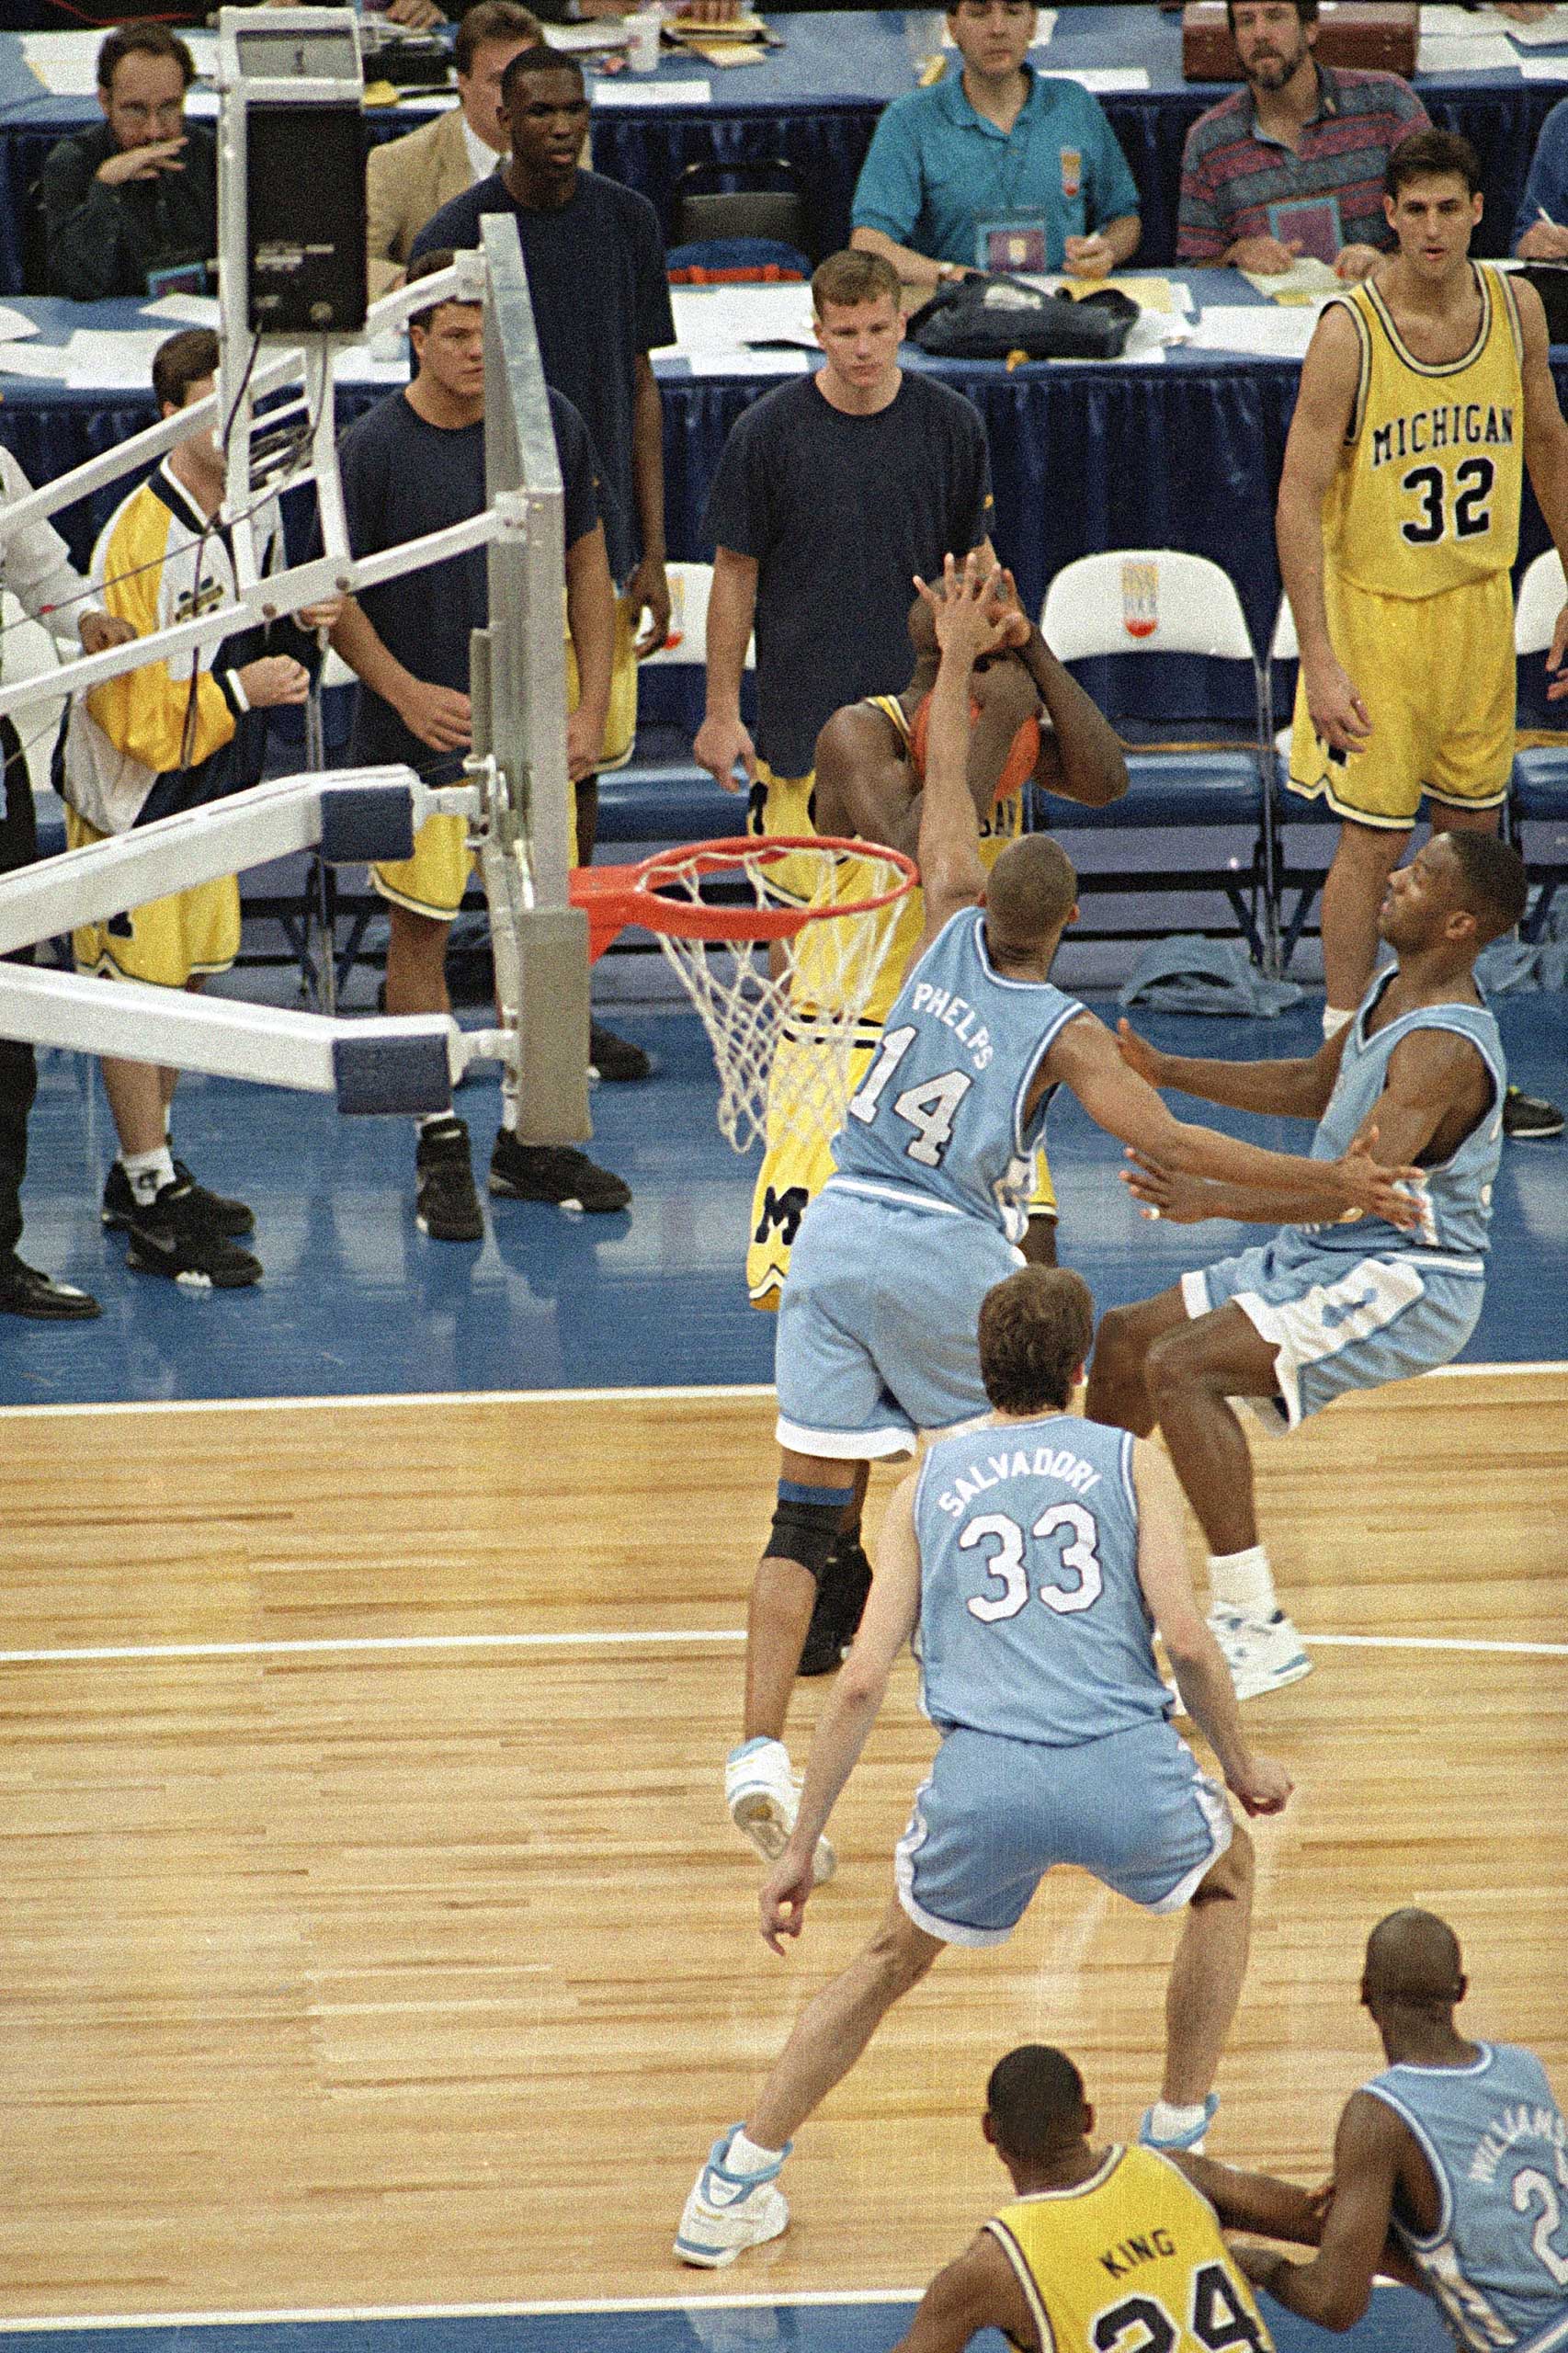 Michigan's Chris Webber, guarded by North Carolina's Derrick Phelps, calls a timeout in the closing moments of the NCAA finals at the Super Dome in New Orleans, April 5, 1993. Webber was called for a technical foul because they had no time outs left and North Carolina went on to win, 77-71. (AP Photo/Bill Haber)